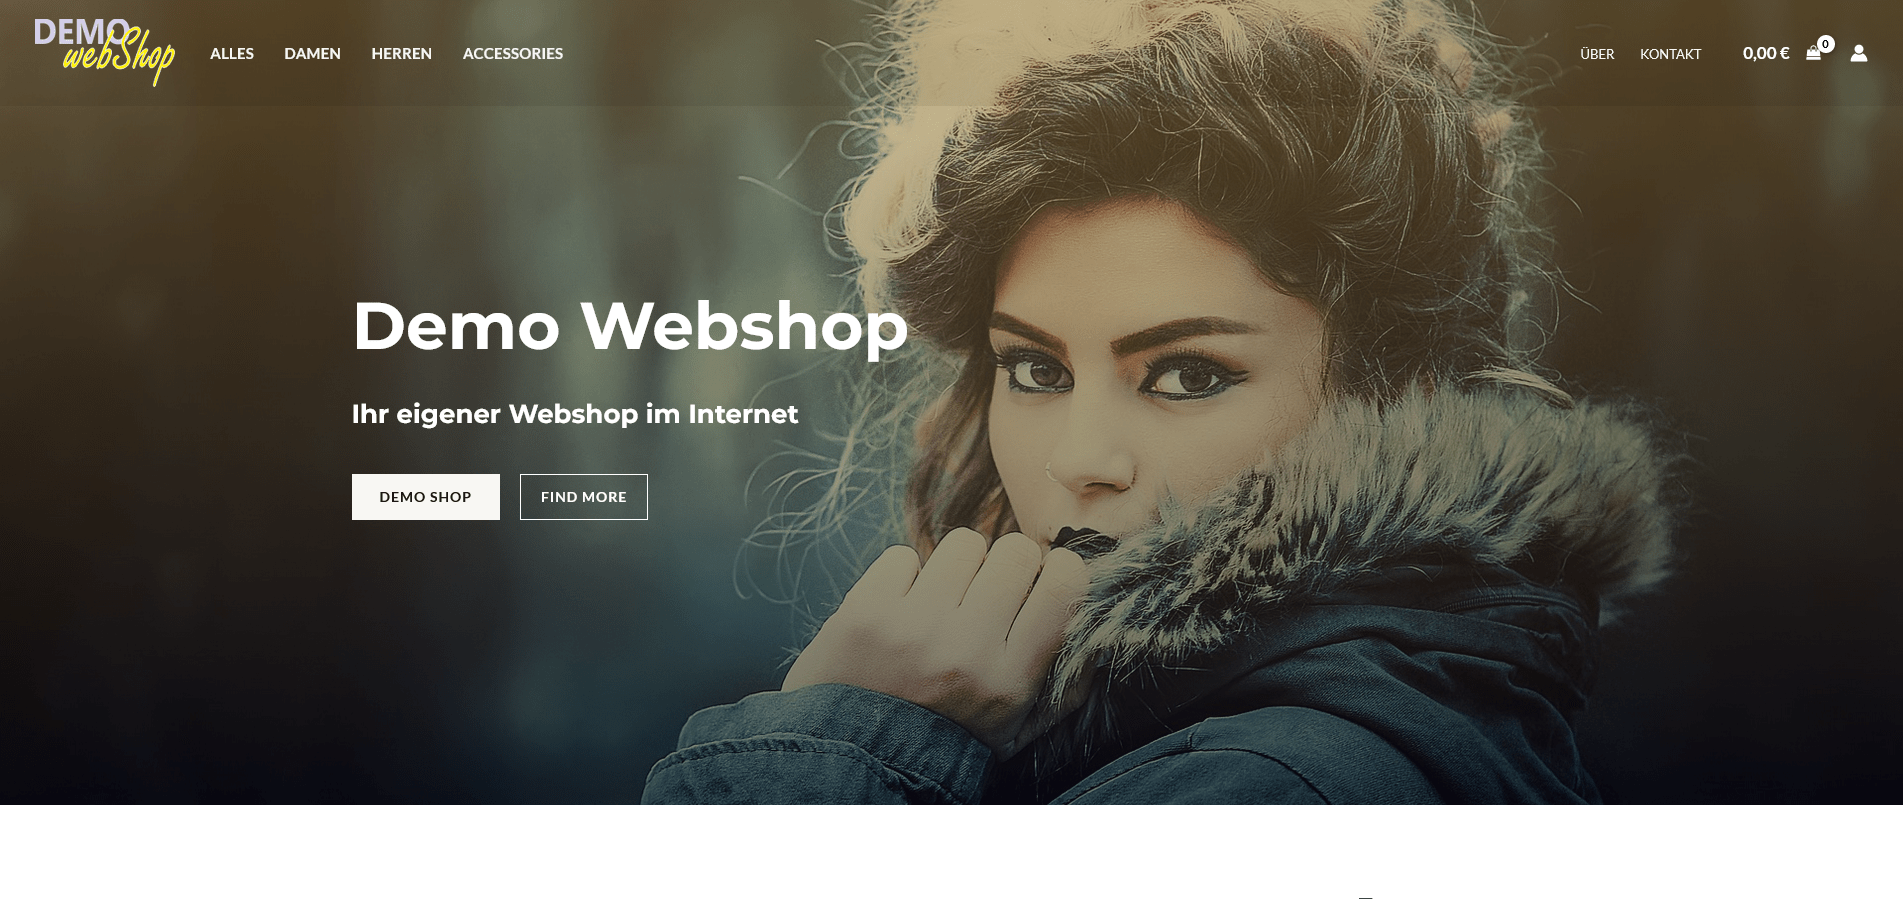 You are currently viewing Webshop – Demo